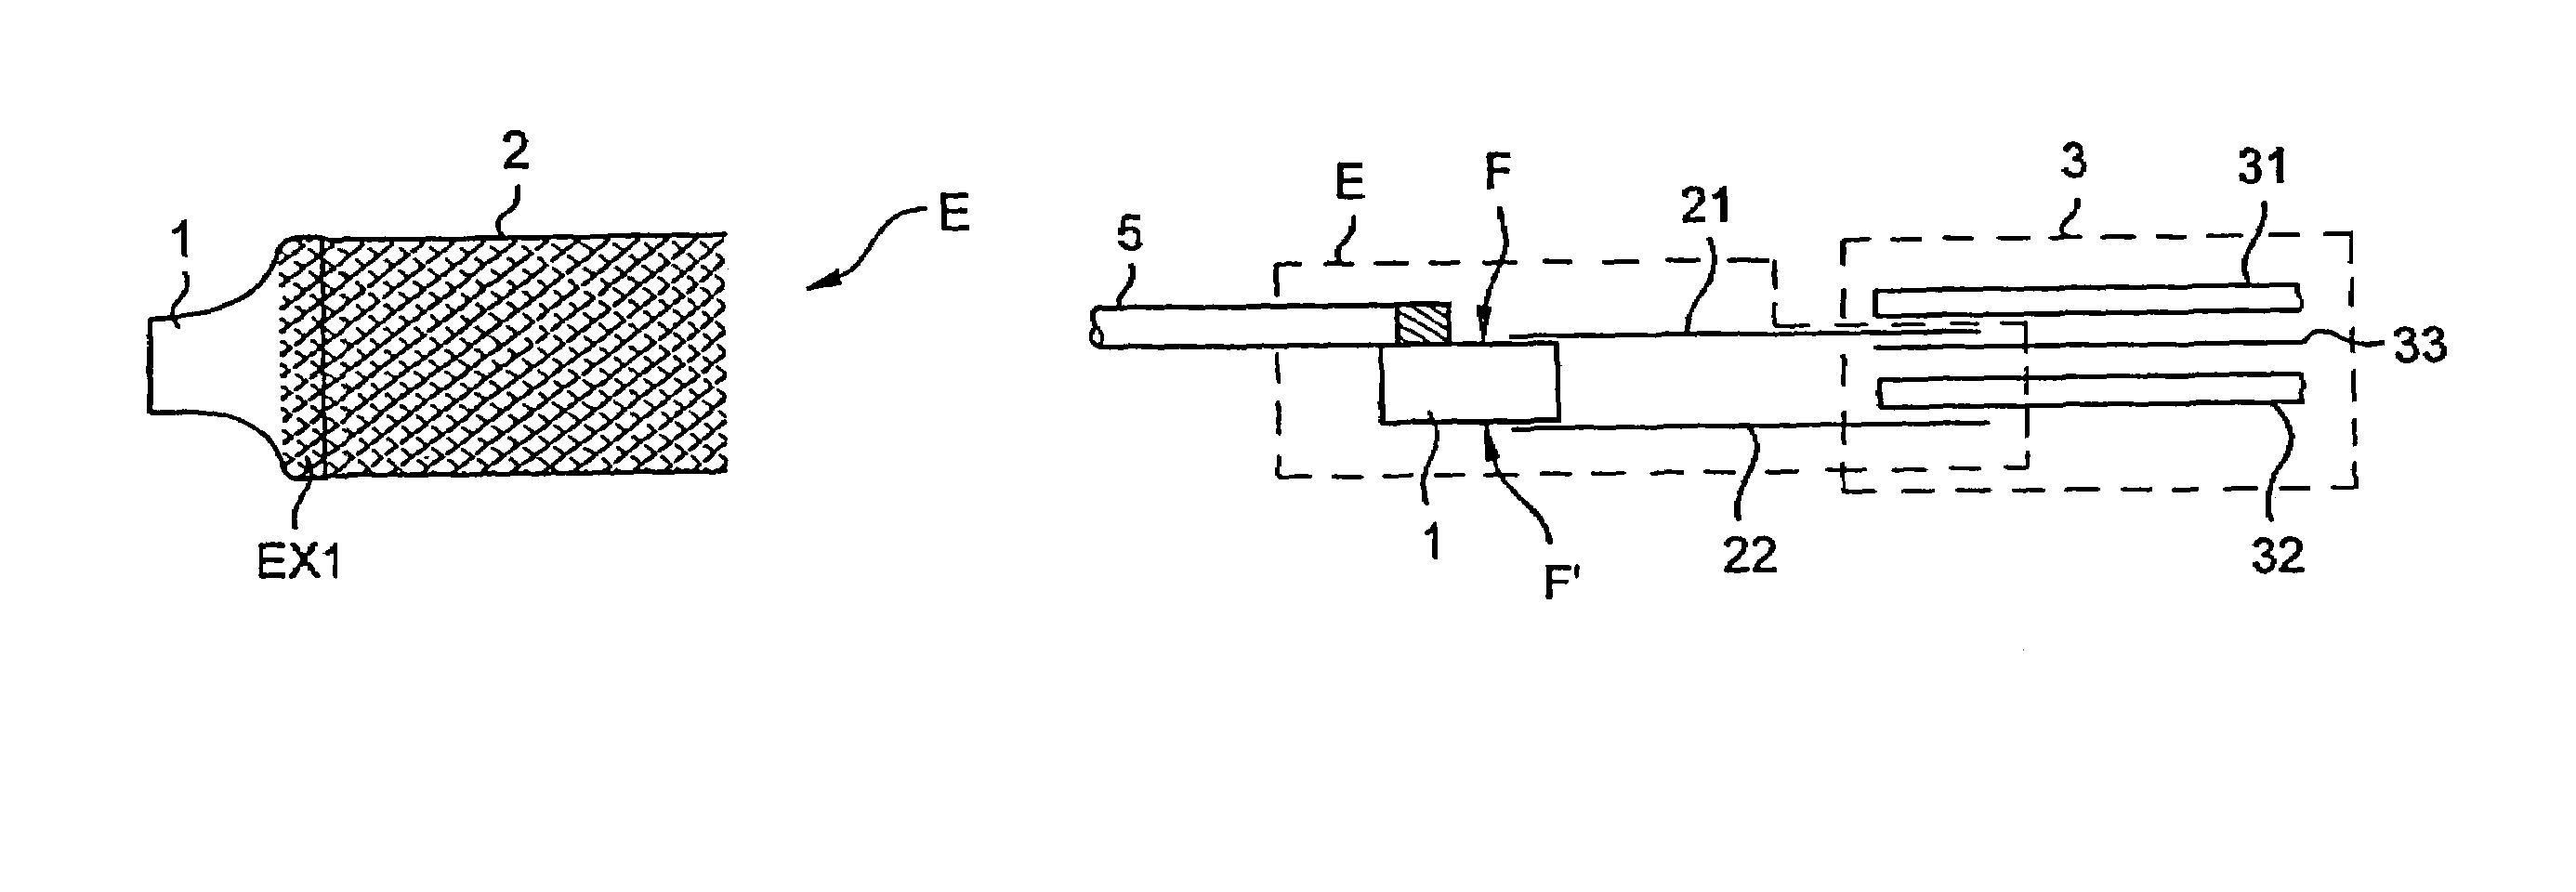 Electrical connection for a resistor element made of electrically-conductive fibers